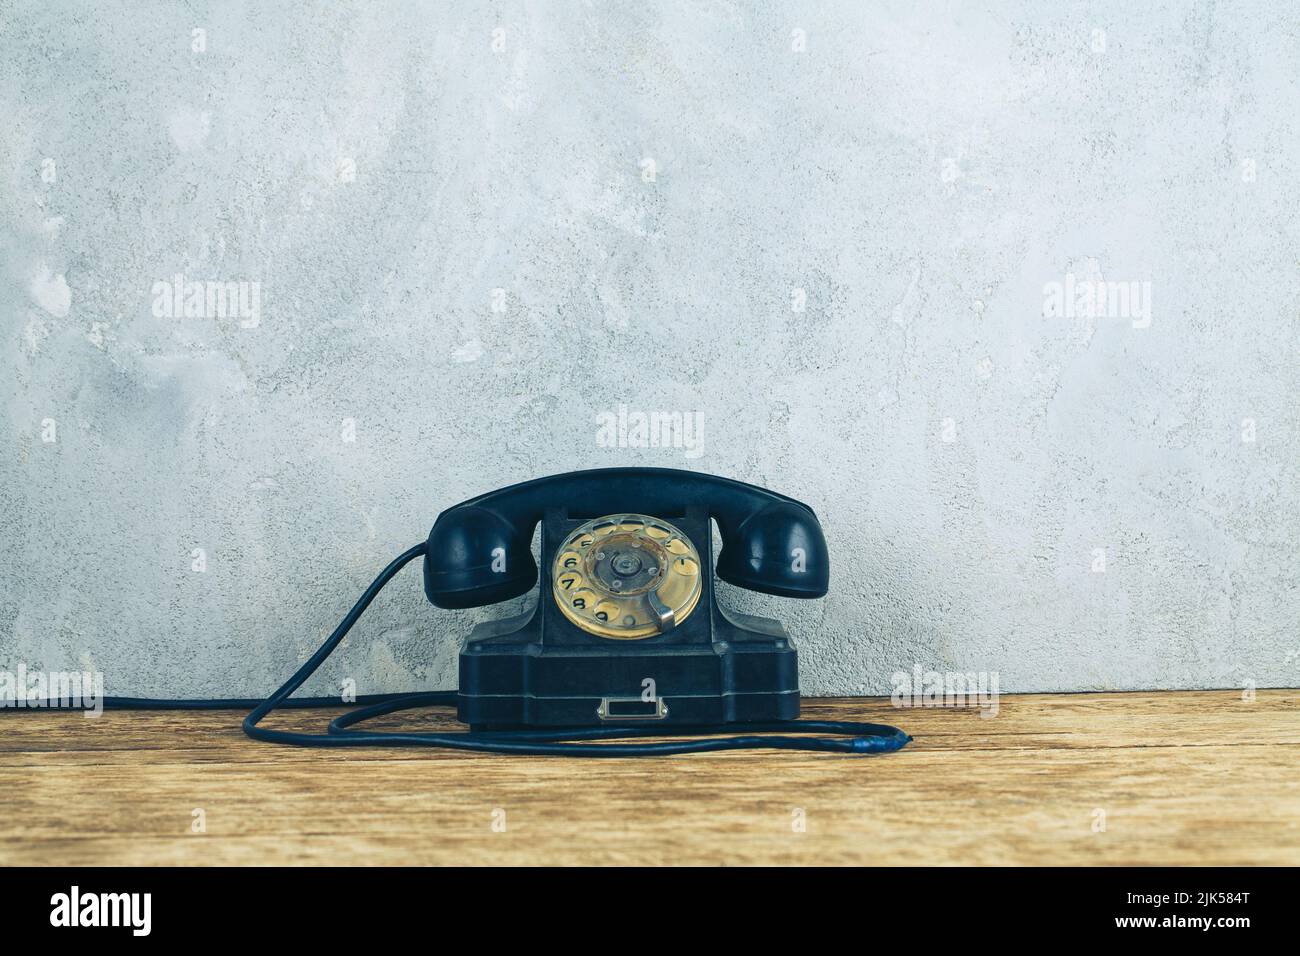 Retro black rotary telephone on wooden table in front gray concrete background Stock Photo